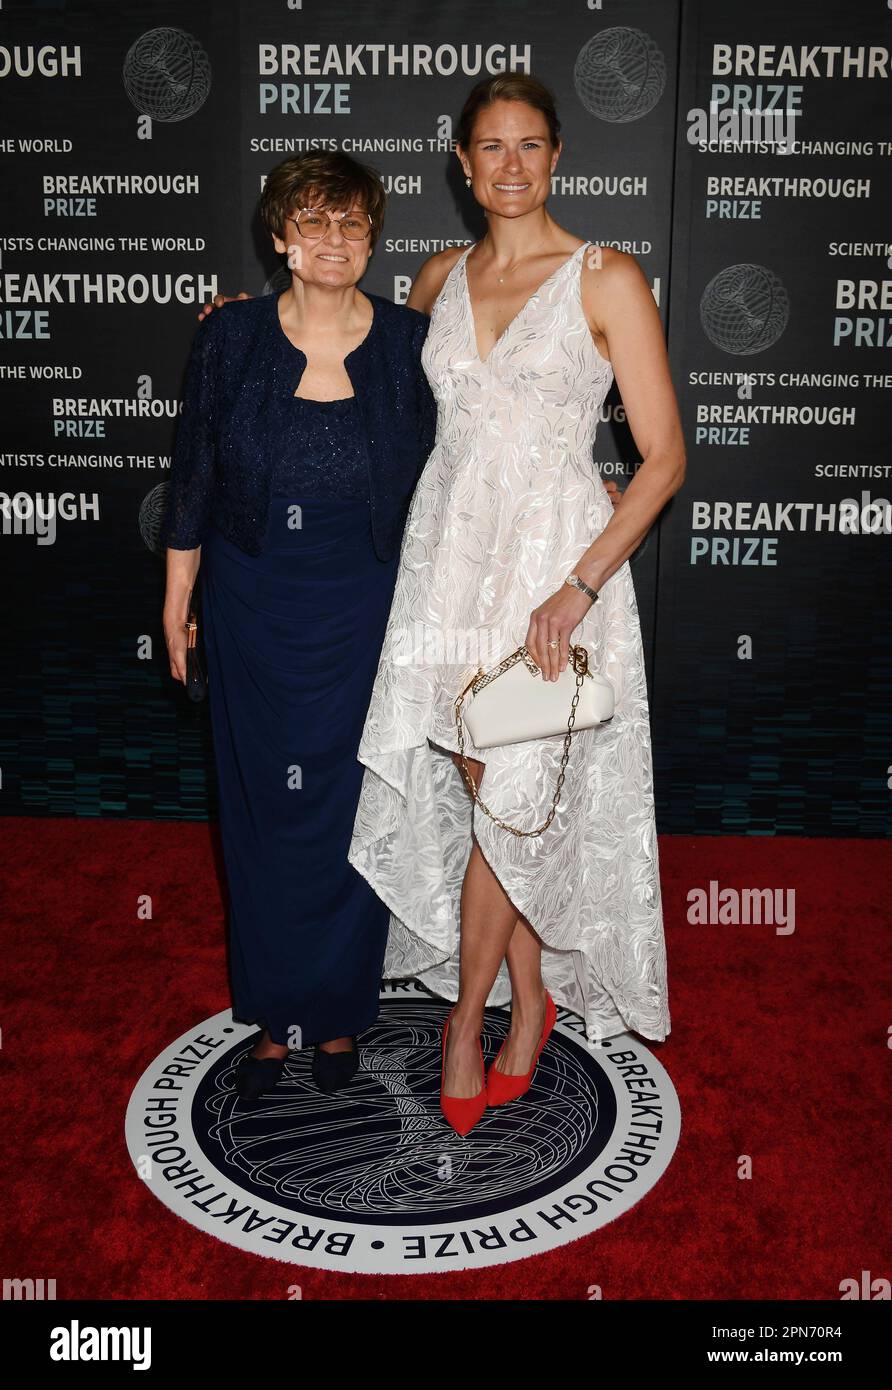 Los Angeles, California, USA. 15th Apr, 2023. (L-R) Dr. Katalin Kariko and Zsuzsanna Francia attend the Ninth Breakthrough Prize Ceremony at Academy Museum of Motion Pictures on April 15, 2023 in Los Angeles, California. Credit: Jeffrey Mayer/Jtm Photos,/Media Punch/Alamy Live News Stock Photo